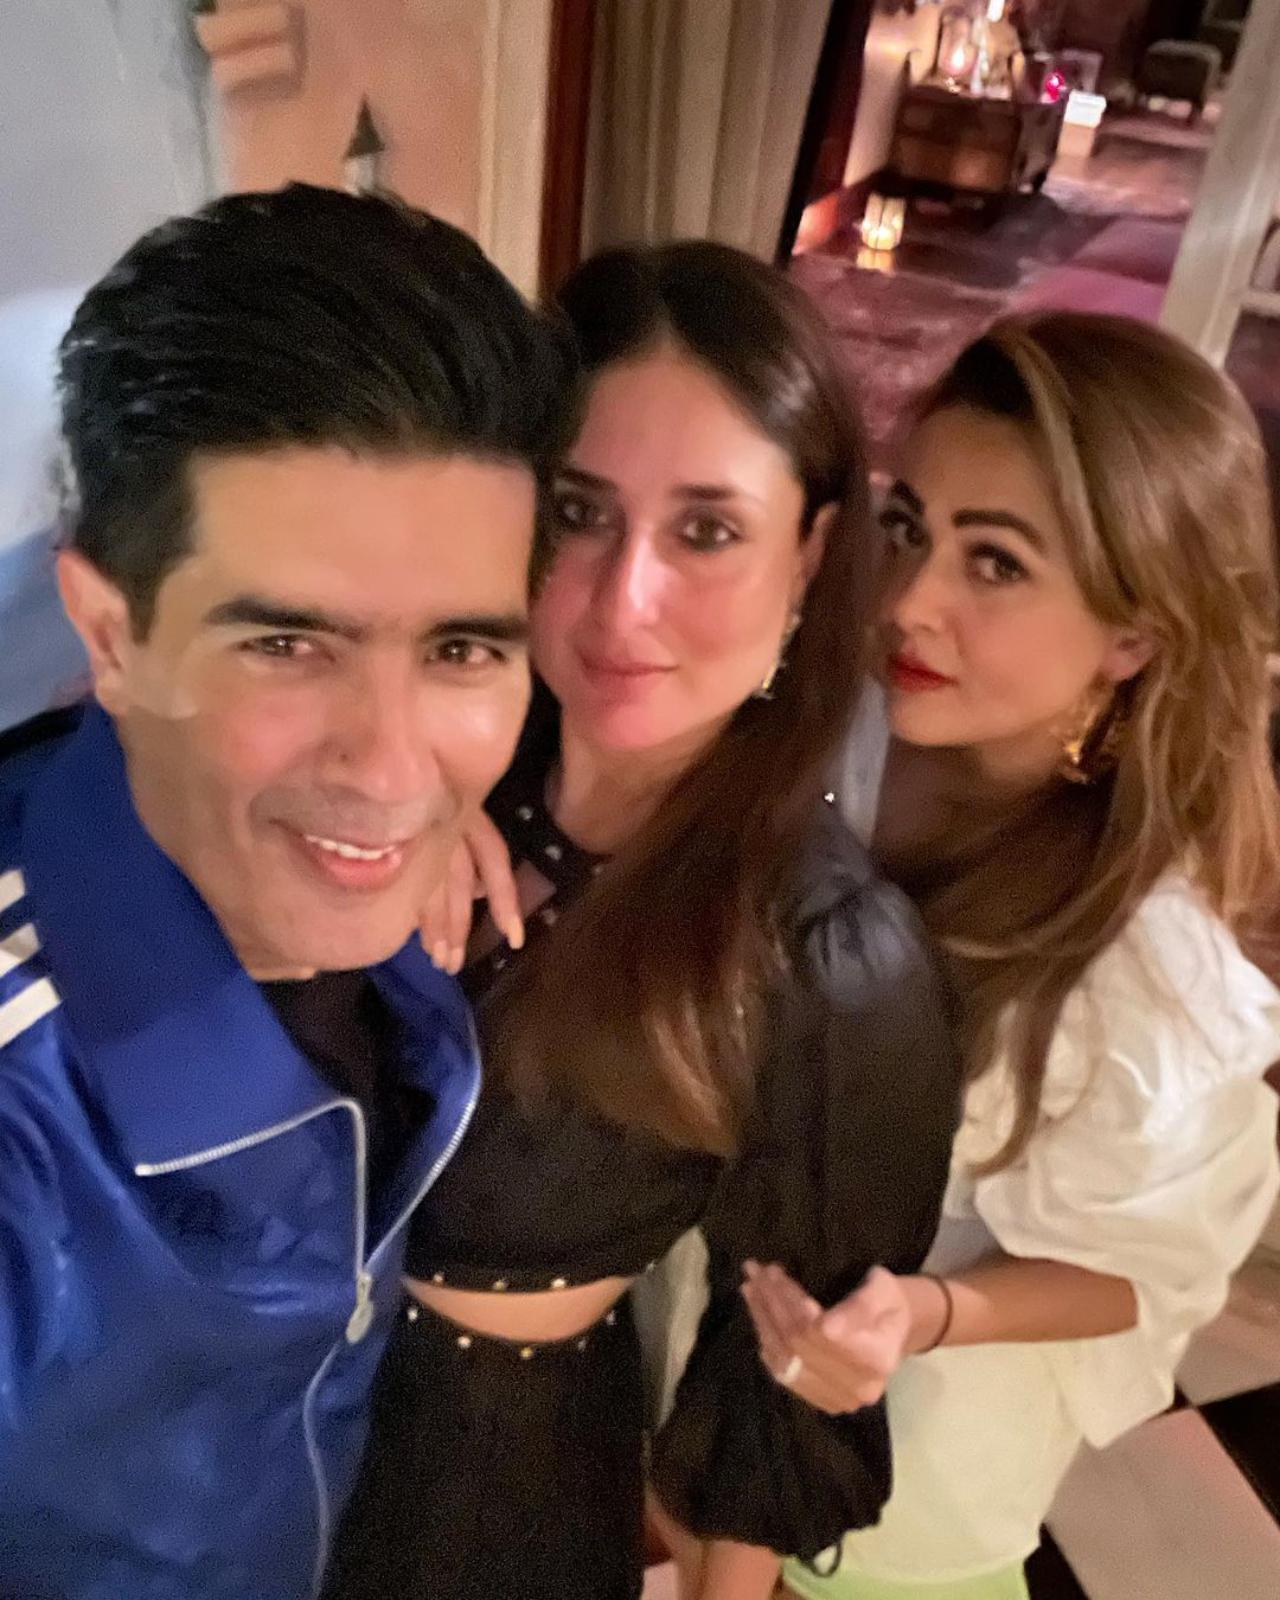 Ace designer Manish Malhotra took to his social media handle to share pictures from Kareena Kapoor's birthday bash on Wednesday night